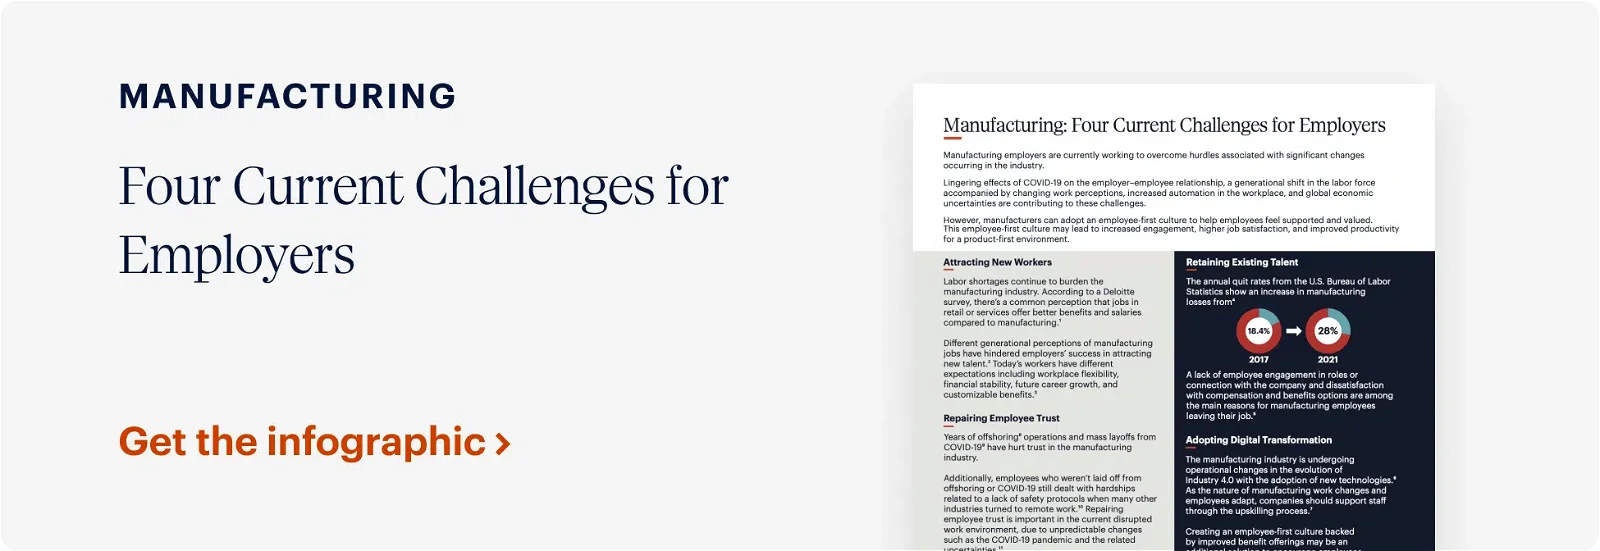 Infographic titled "Manufacturing: Four Current Challenges for Employers" alongside a detailed document. Text reads "Get the infographic.